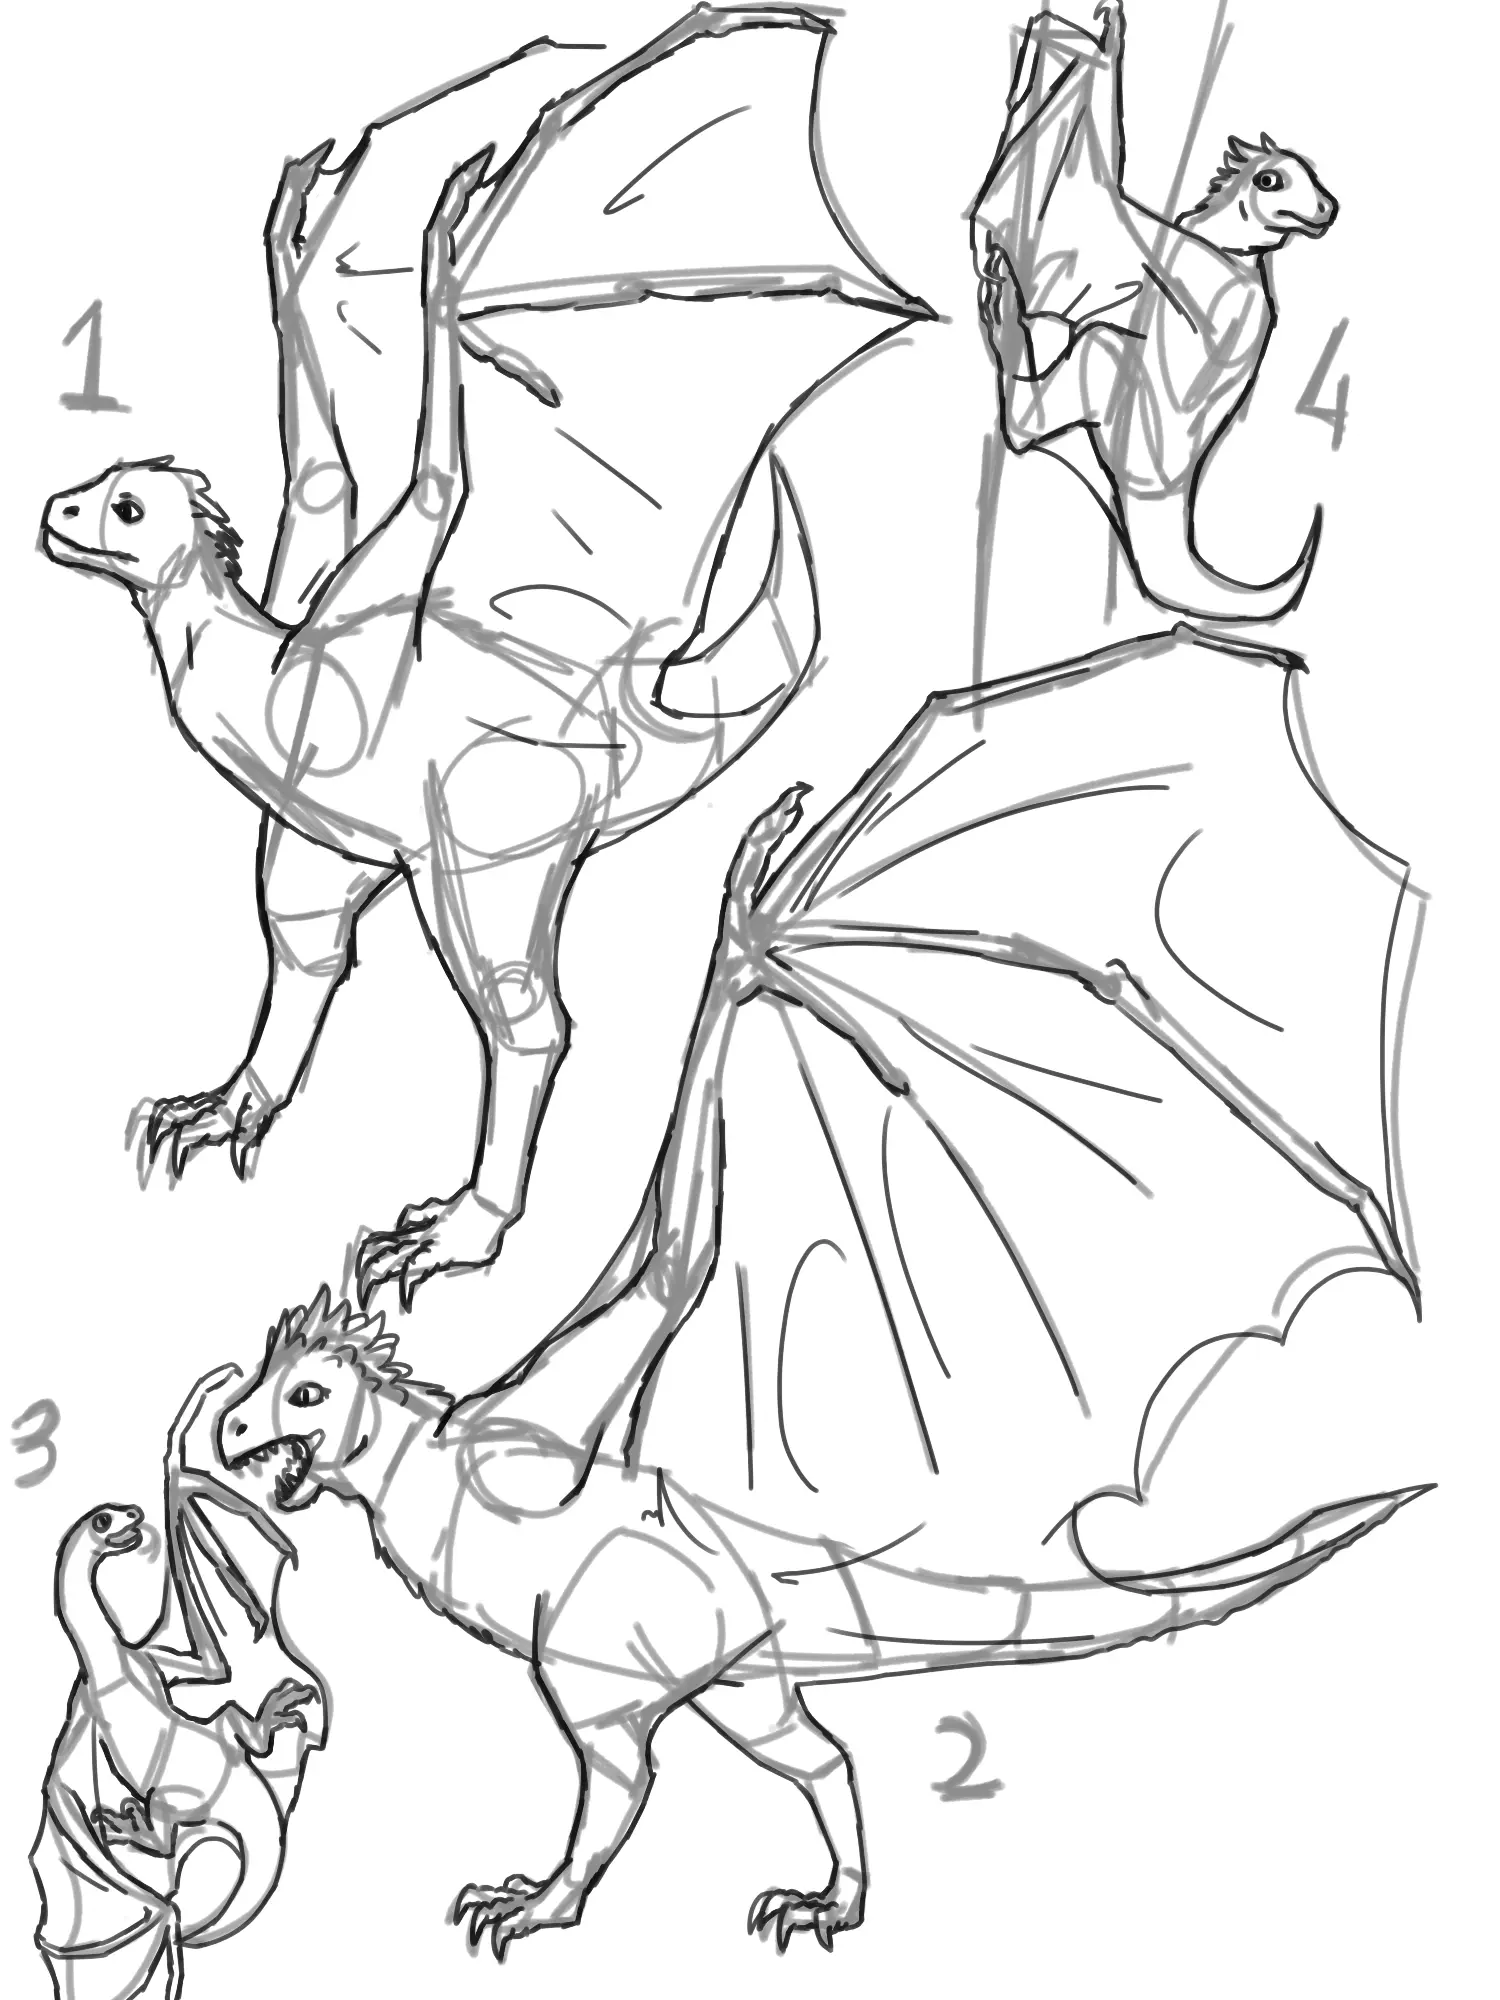 A collection of 4 sketches of different dinosaurs with bat-like wings, resembling dragons.